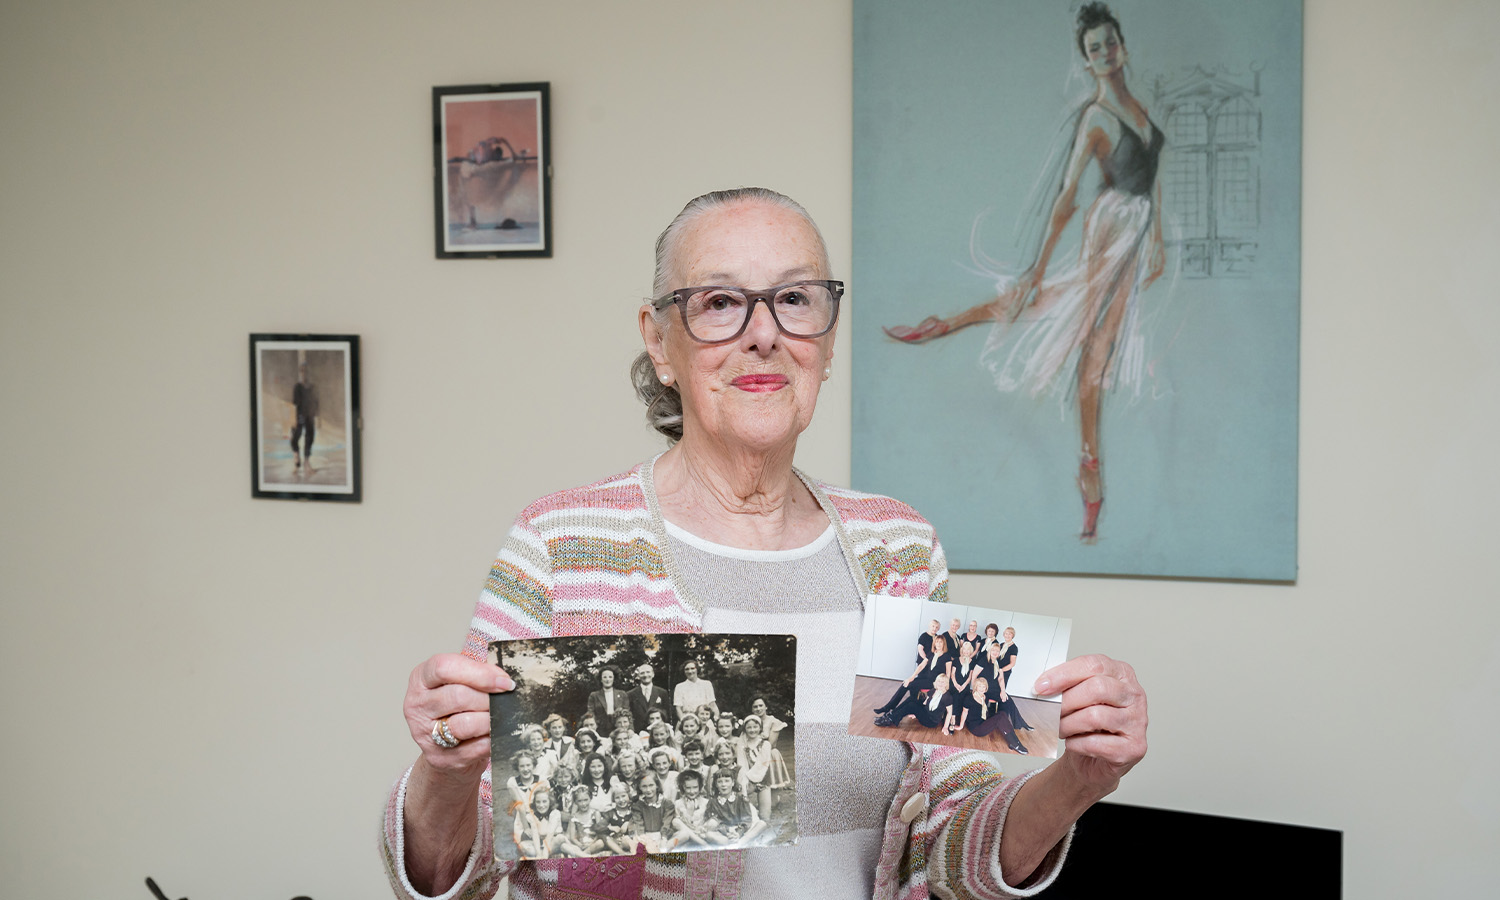 Victoria holds up photos of her dance classes from 1947 and 2022